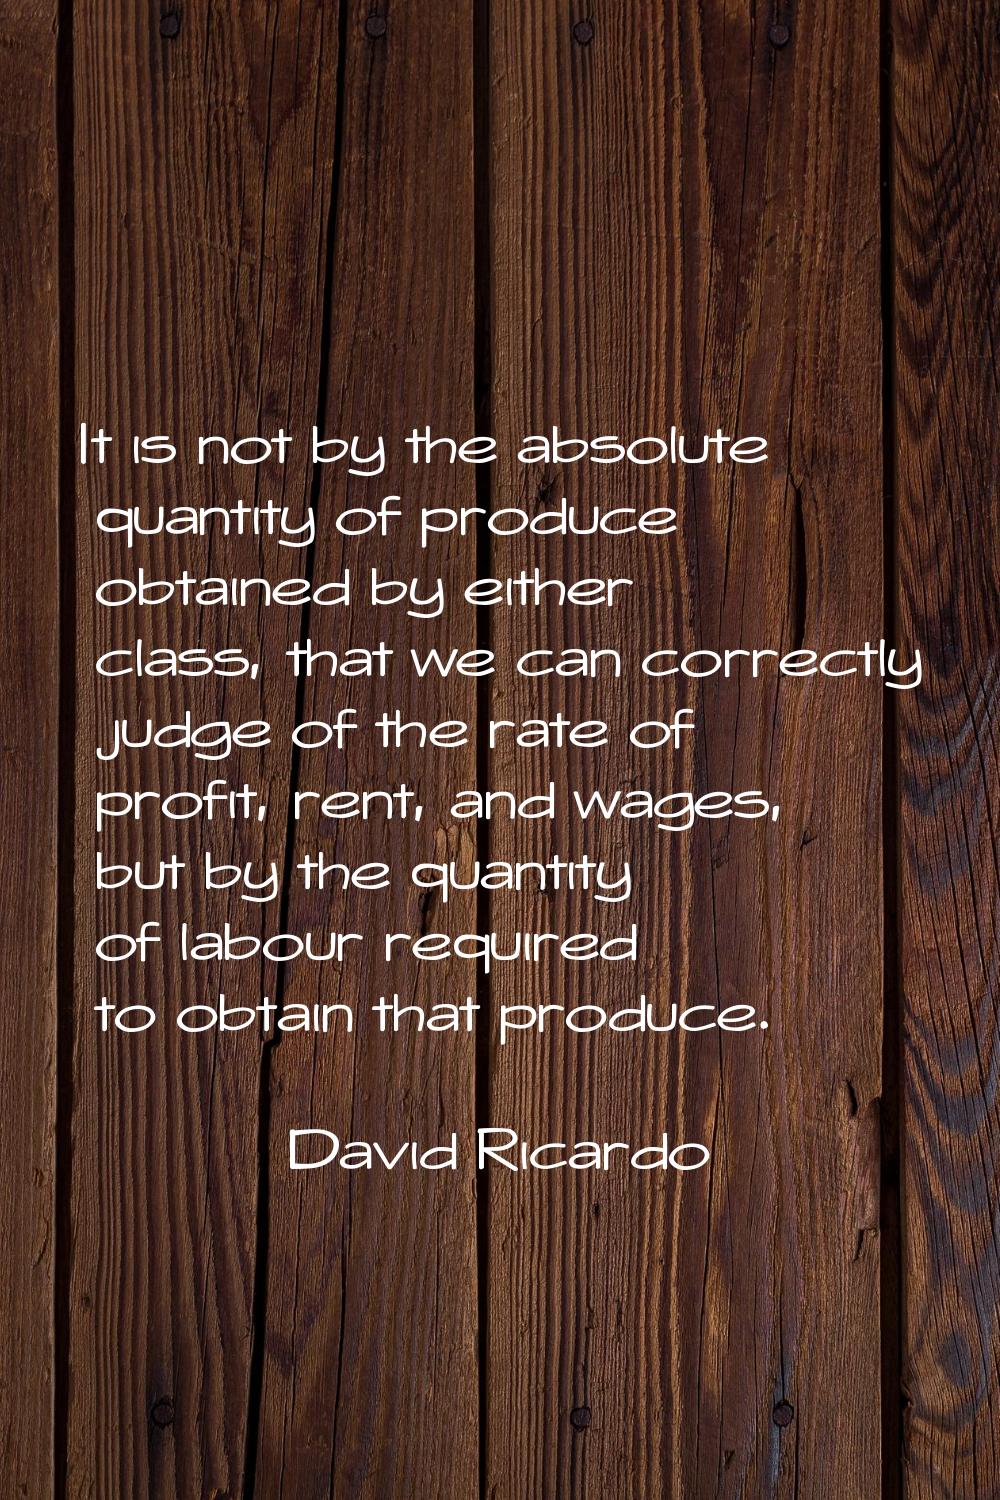 It is not by the absolute quantity of produce obtained by either class, that we can correctly judge